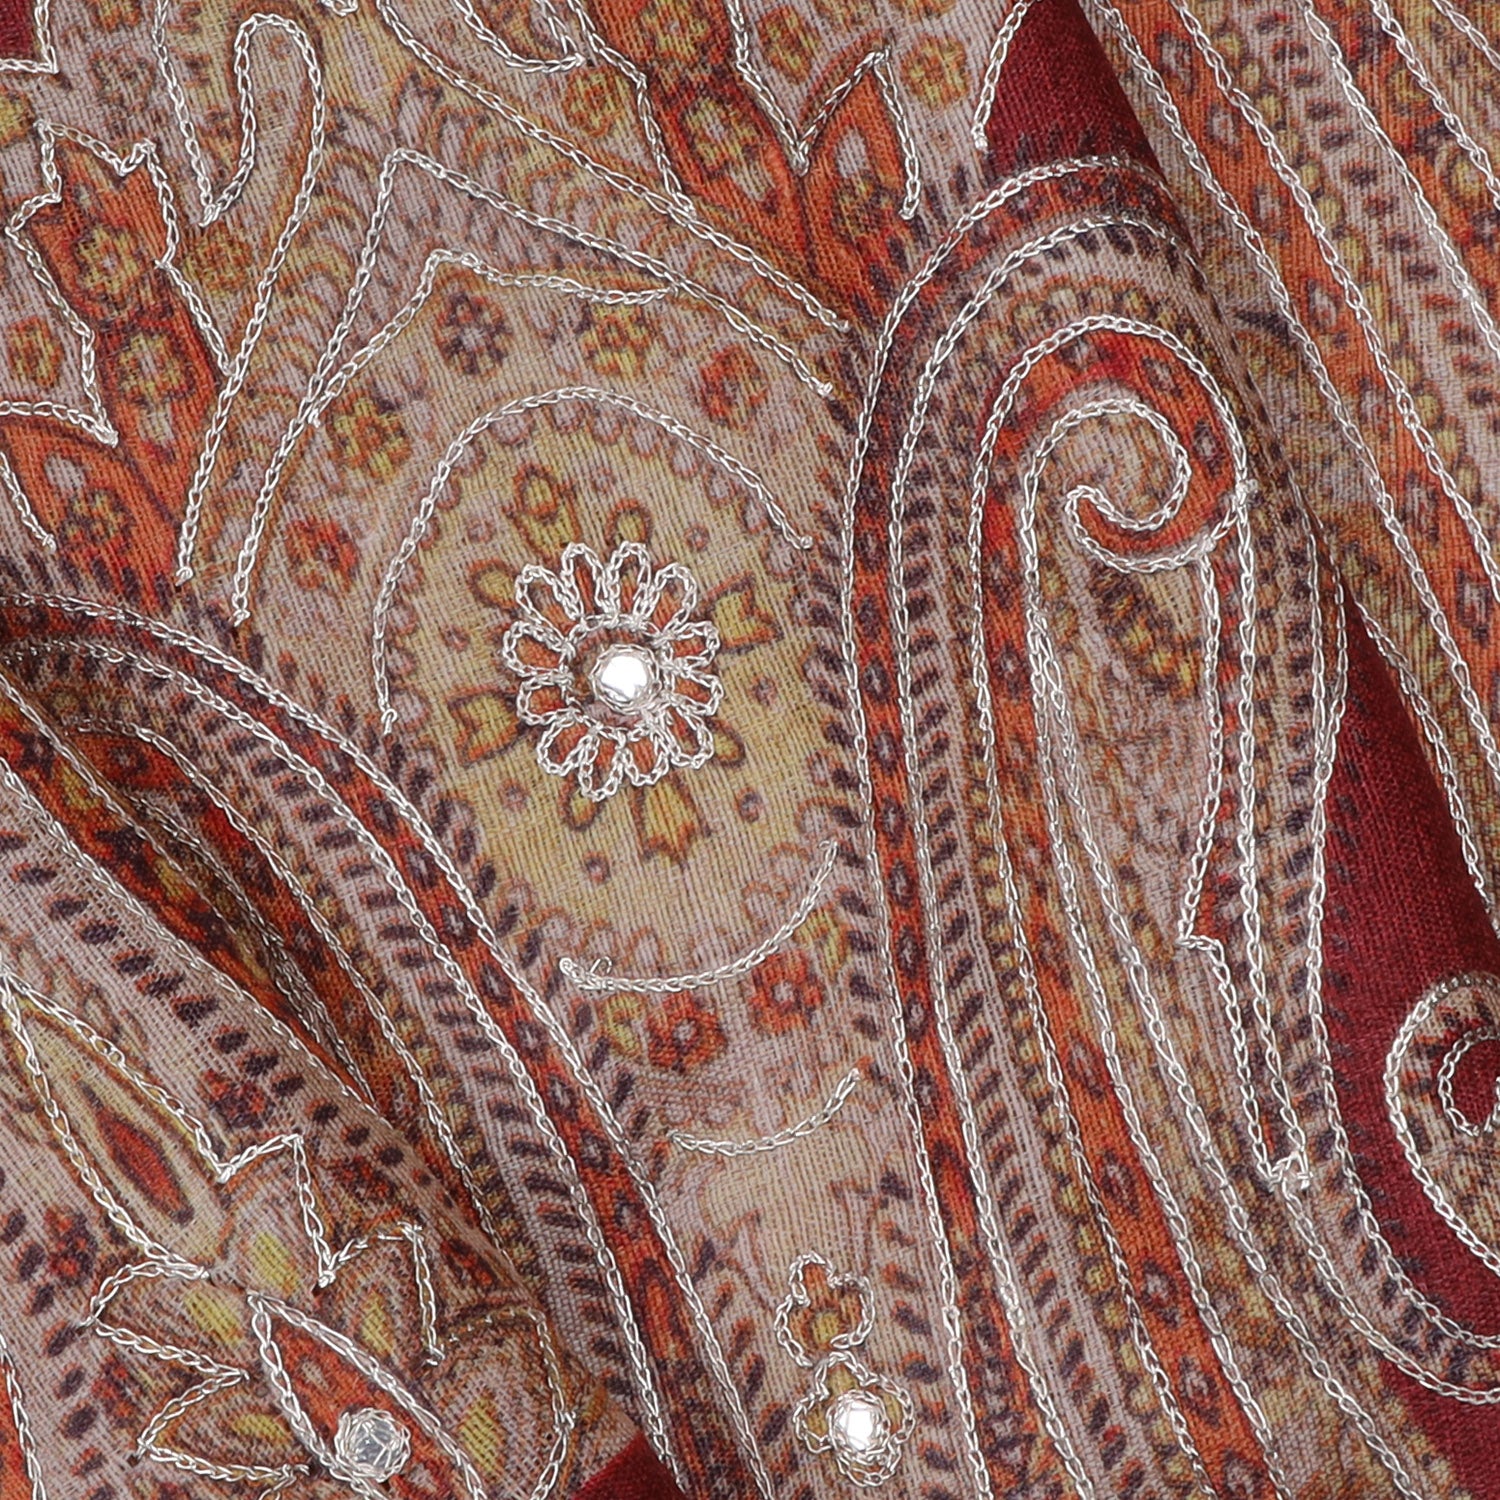 Dusky Pink Tussar Saree With Floral Printed Pattern And Hand Embroidery - Singhania's